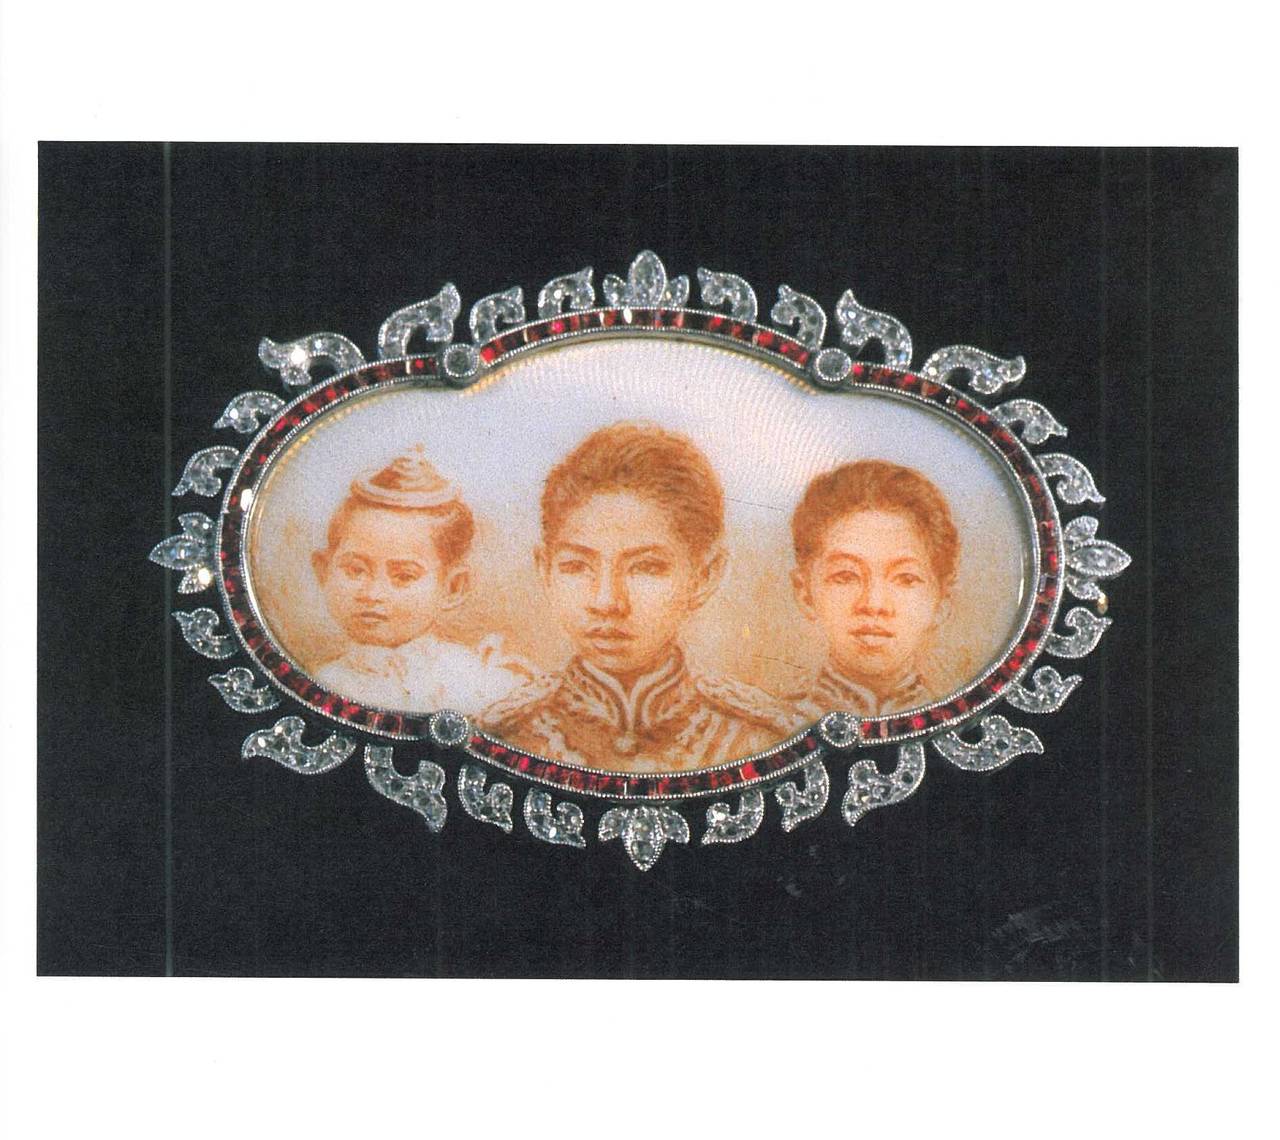 Book - The Faberge Collection of His Late Majesty King Chulalongkorn of Thailand 1